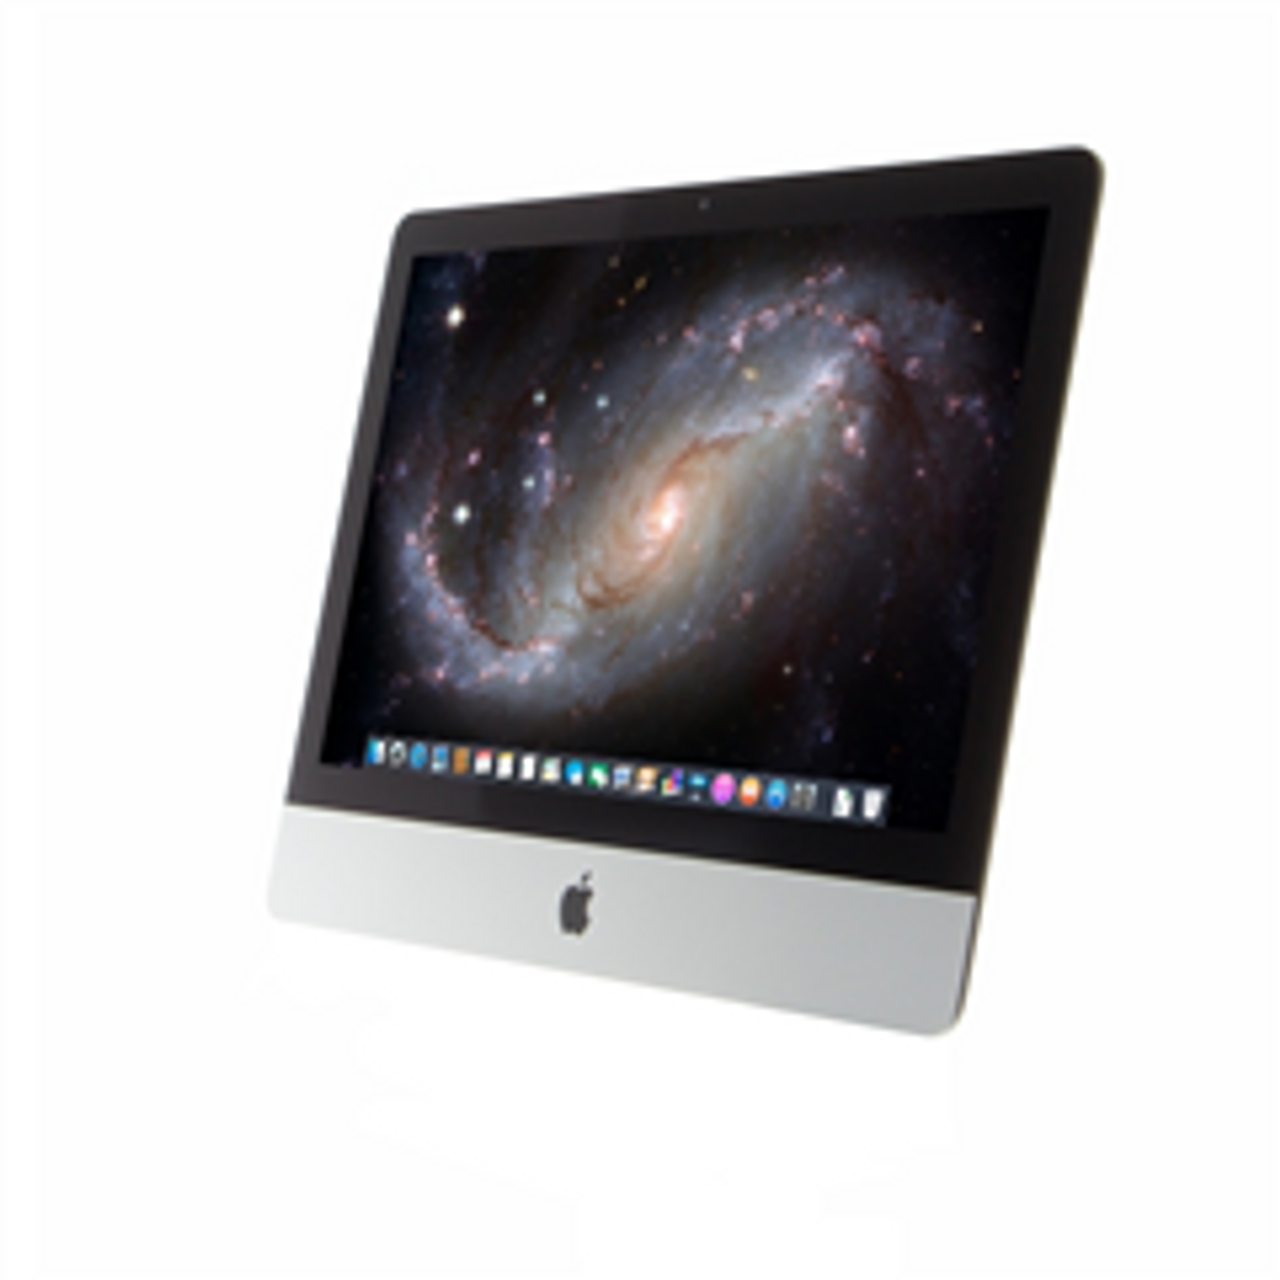 VESA Mount Installed*: Apple iMac Retina 4K 21.5-inch 3.0GHz Six-core i5  (Early 2019) MRT42LL/A - Excellent Condition